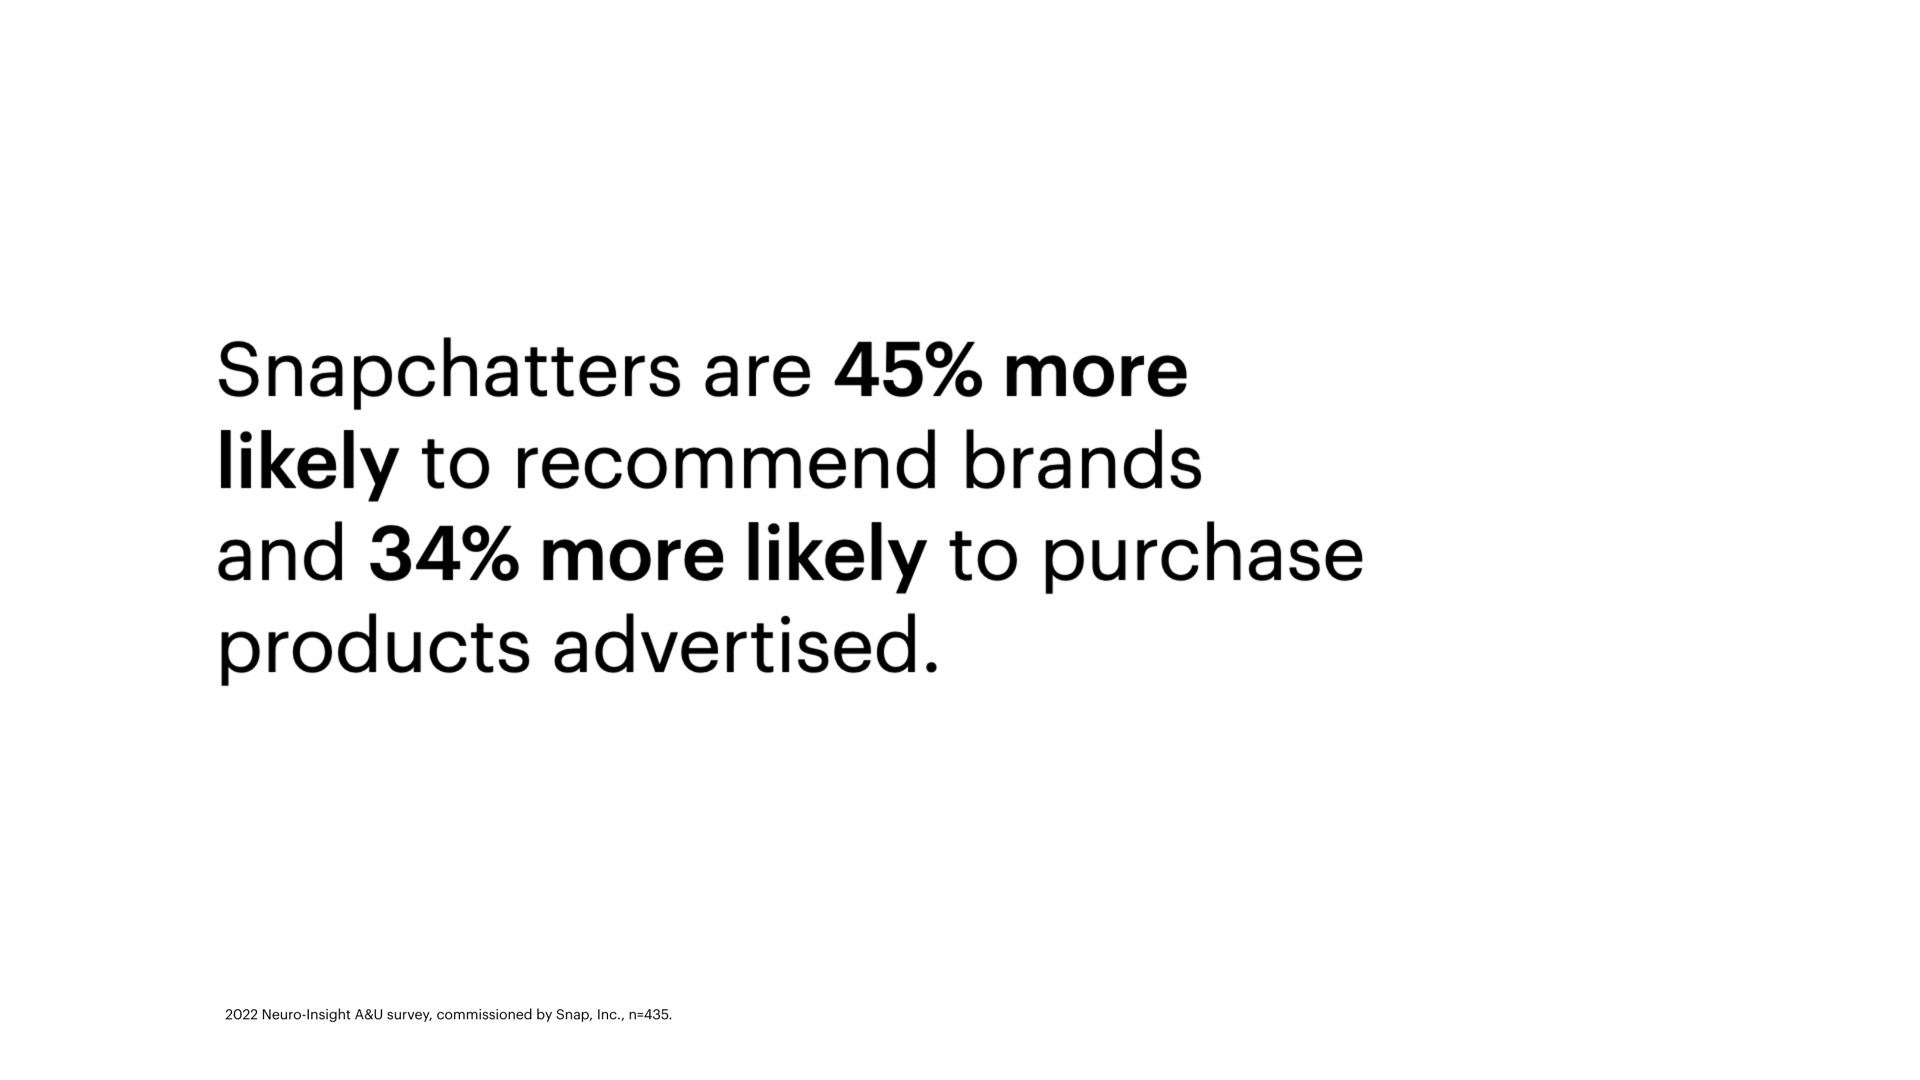 are more likely to recommend brands and more likely to purchase advertised | Snap Inc